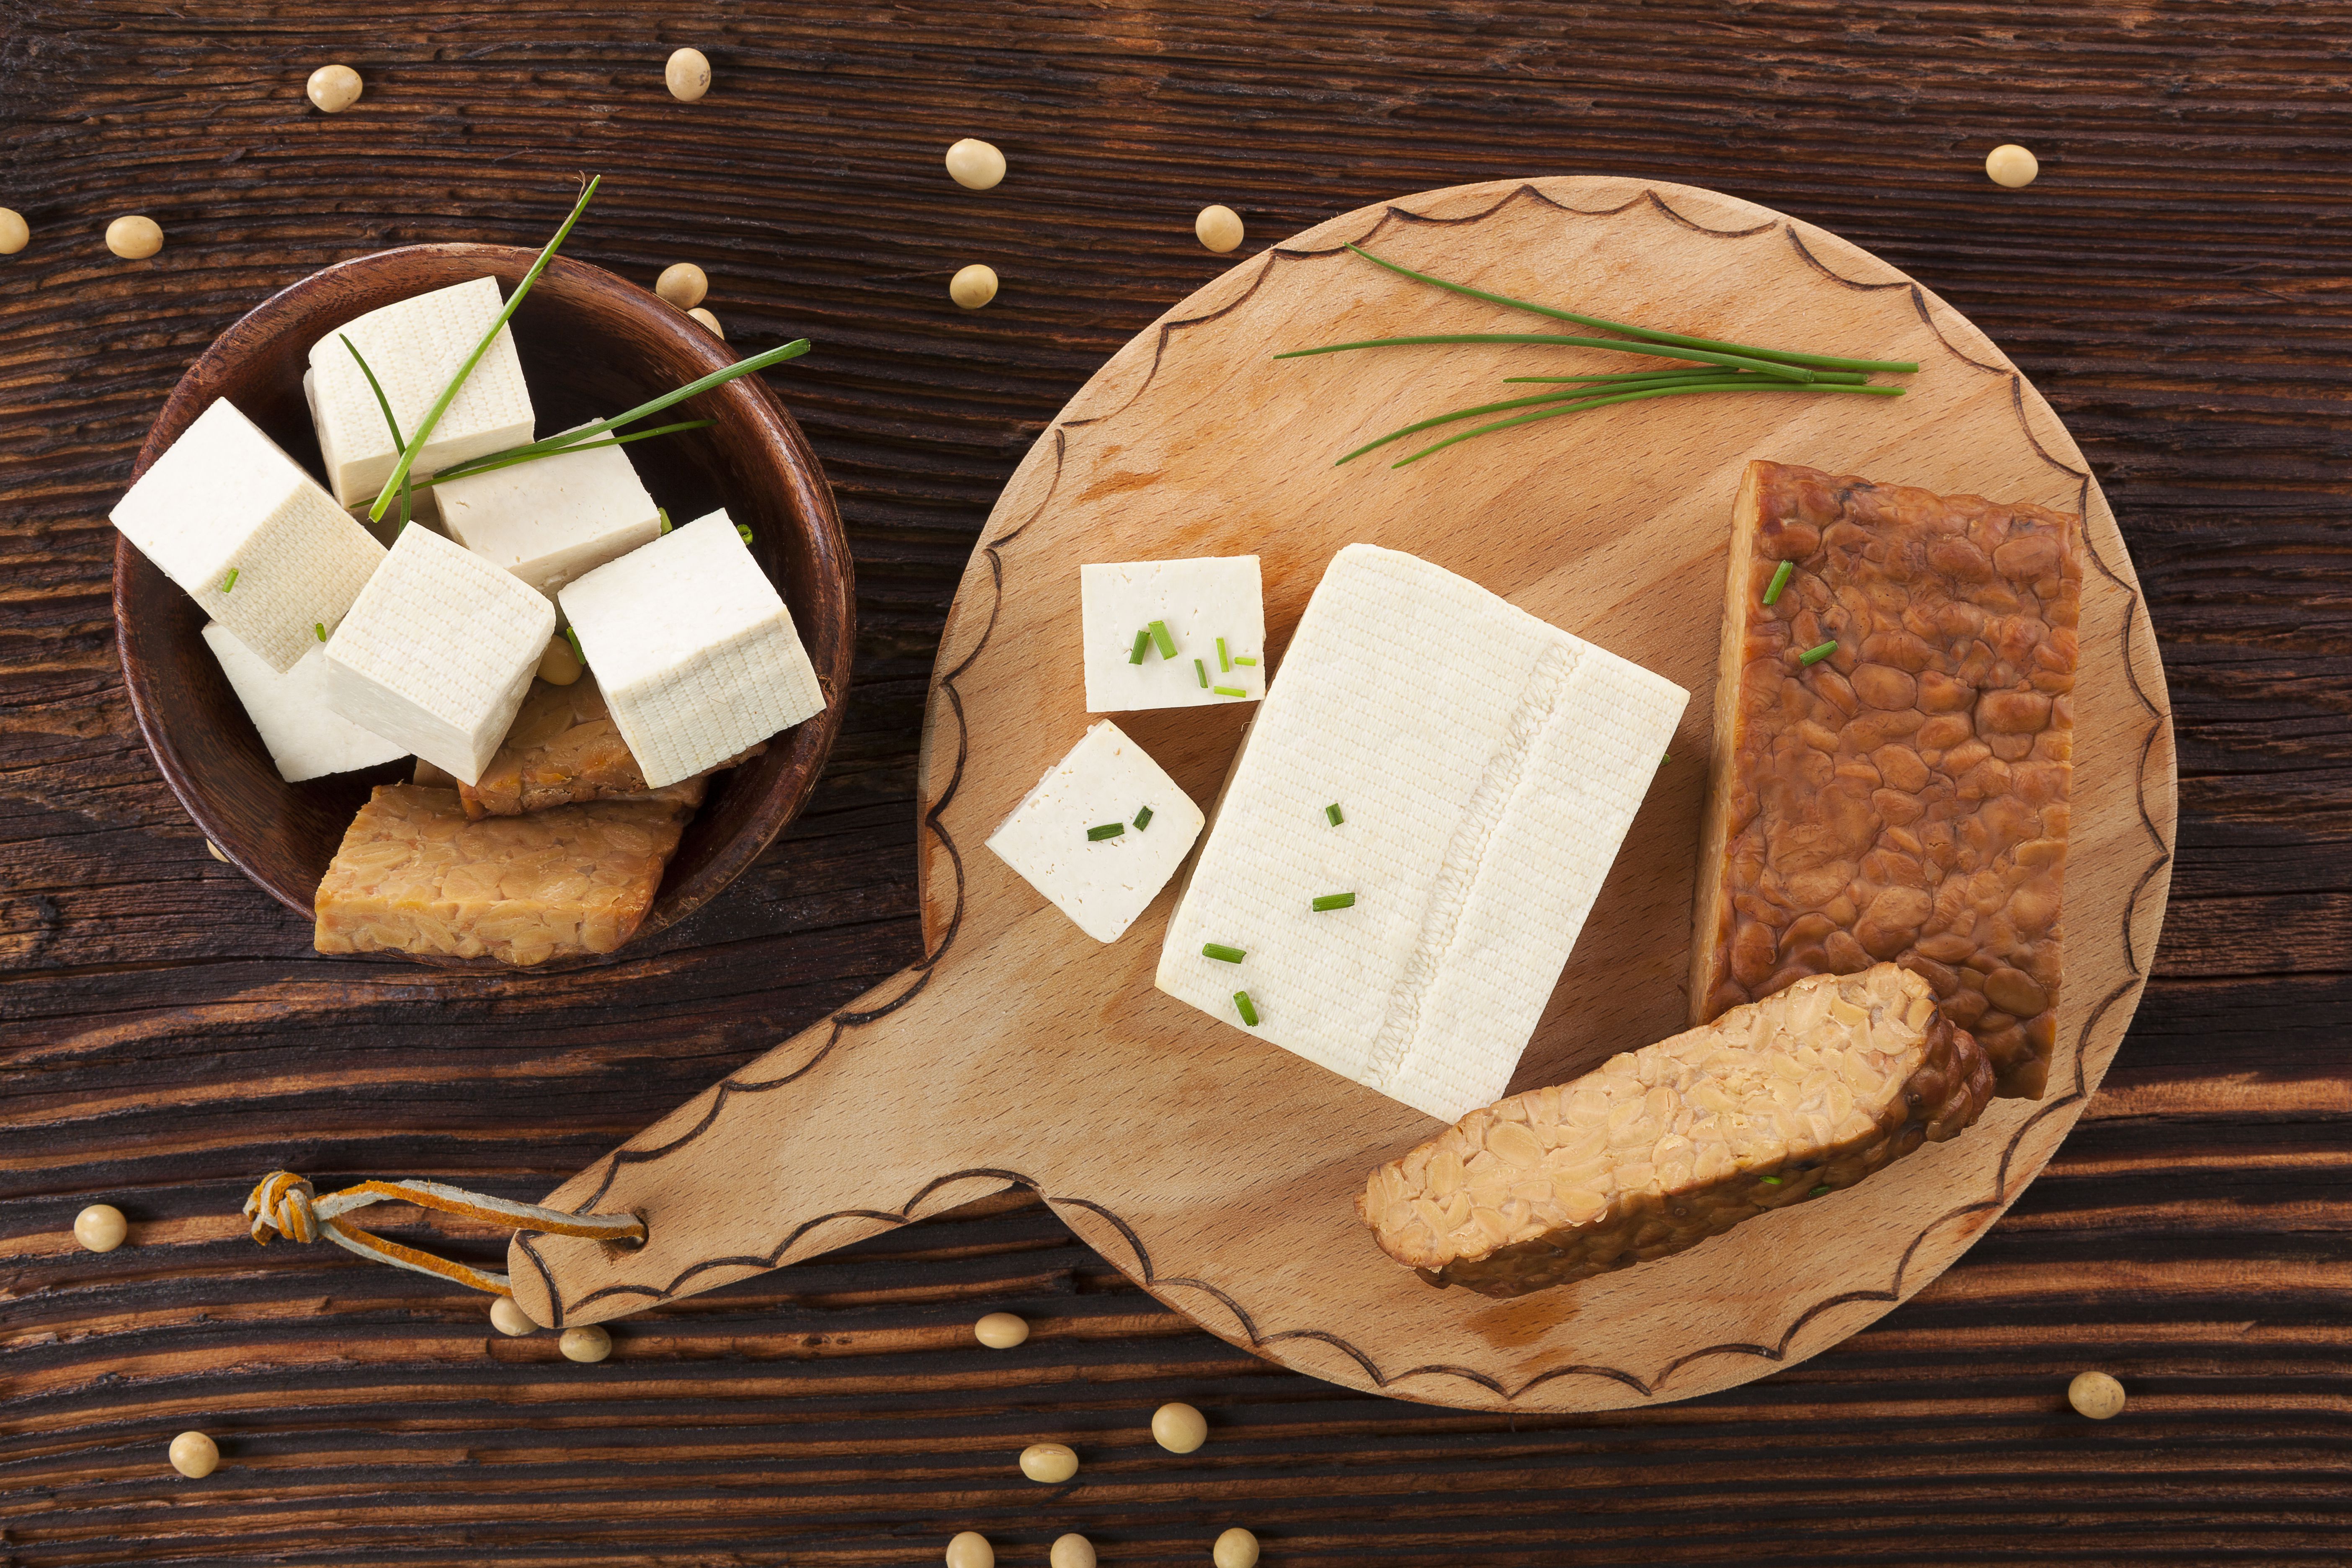 Tempeh Versus Tofu: Which Is More Environmentally Friendly?